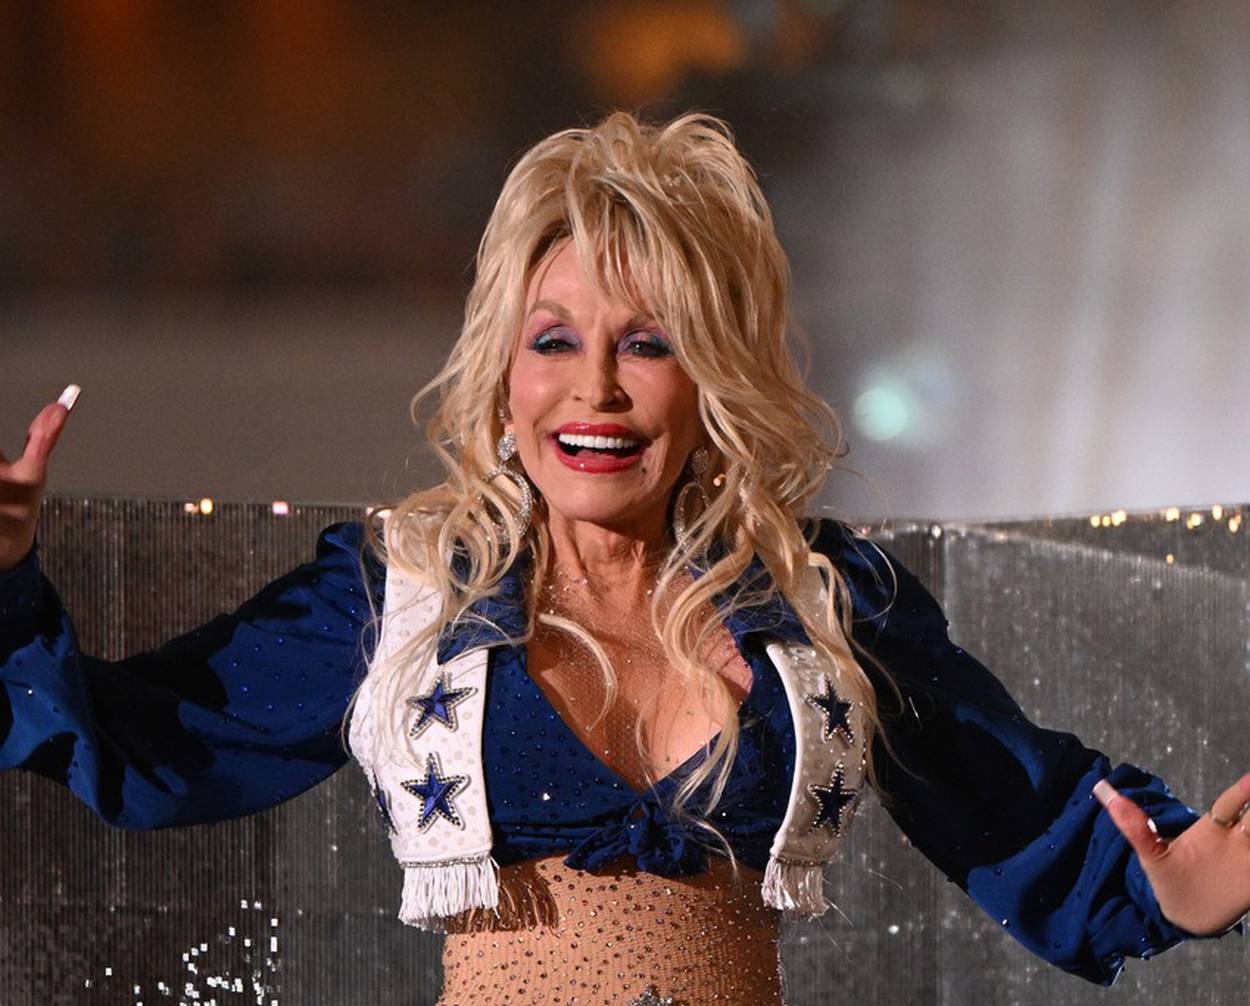 Dolly Parton performs at the Red Kettle Kickoff on Thanksgiving